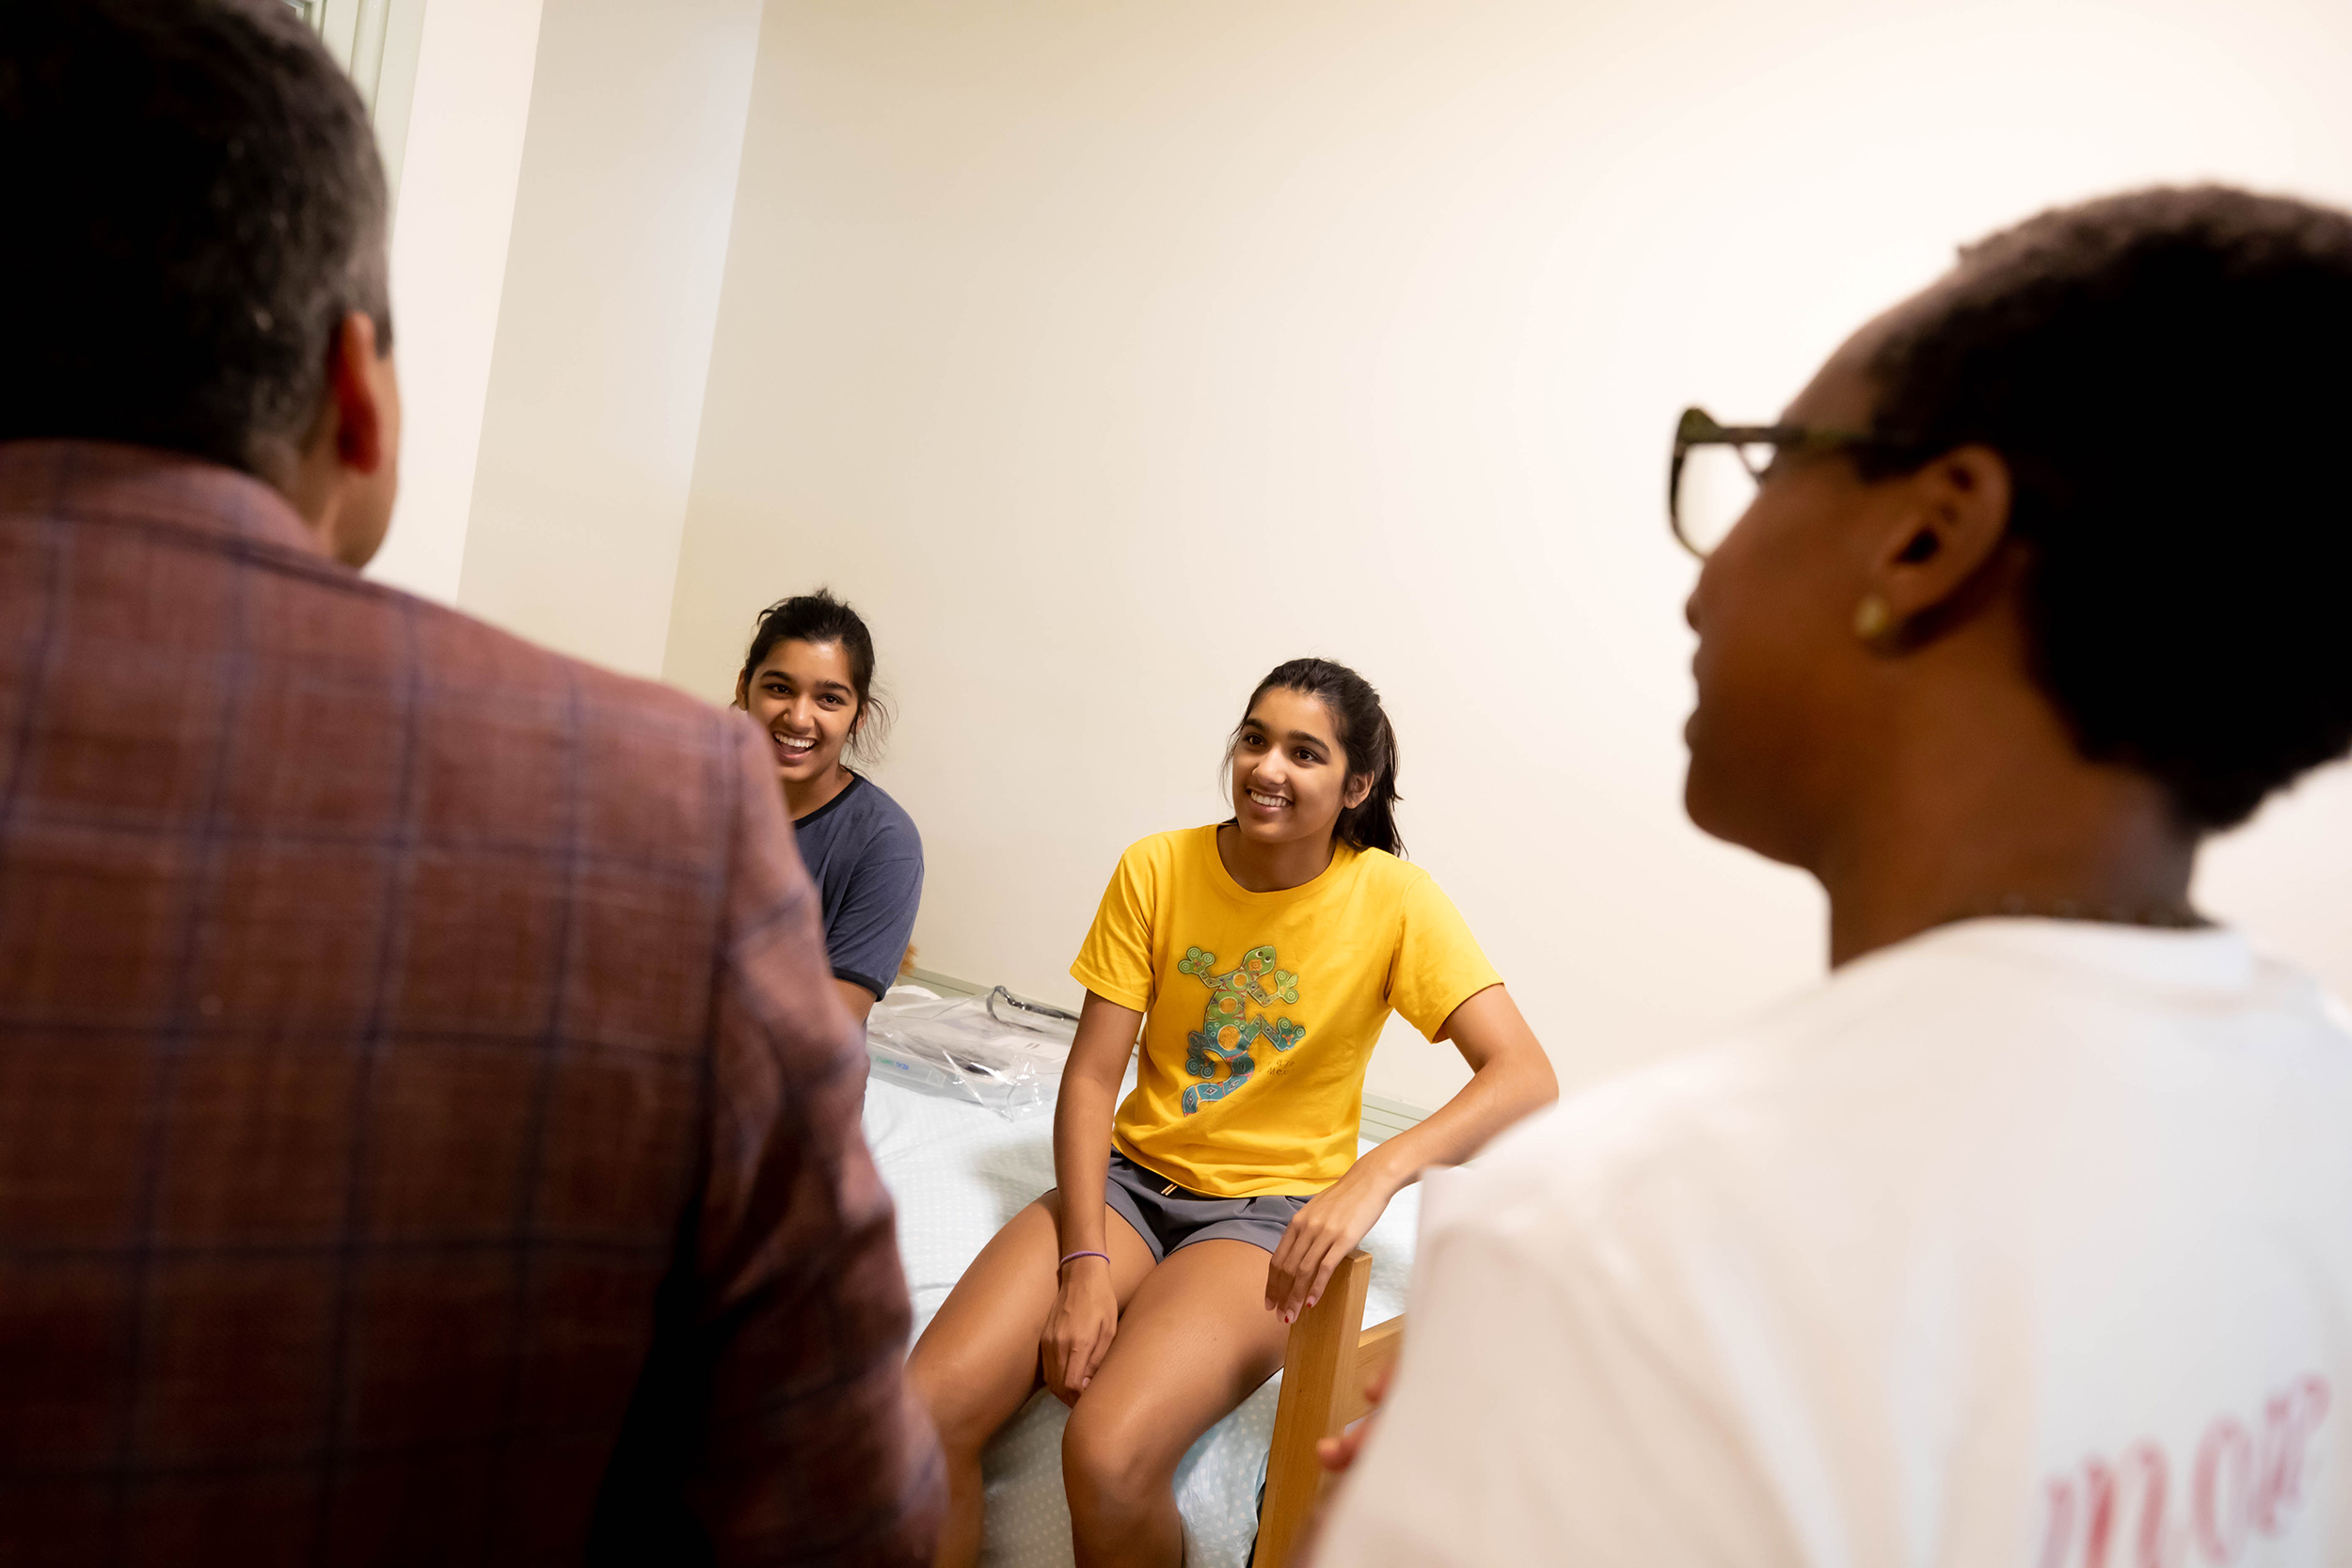 Twins Anisa (left) and Sirina Prasad chat with Deans Rakesh Khurana and Claudine Gay in Sirina’s room.